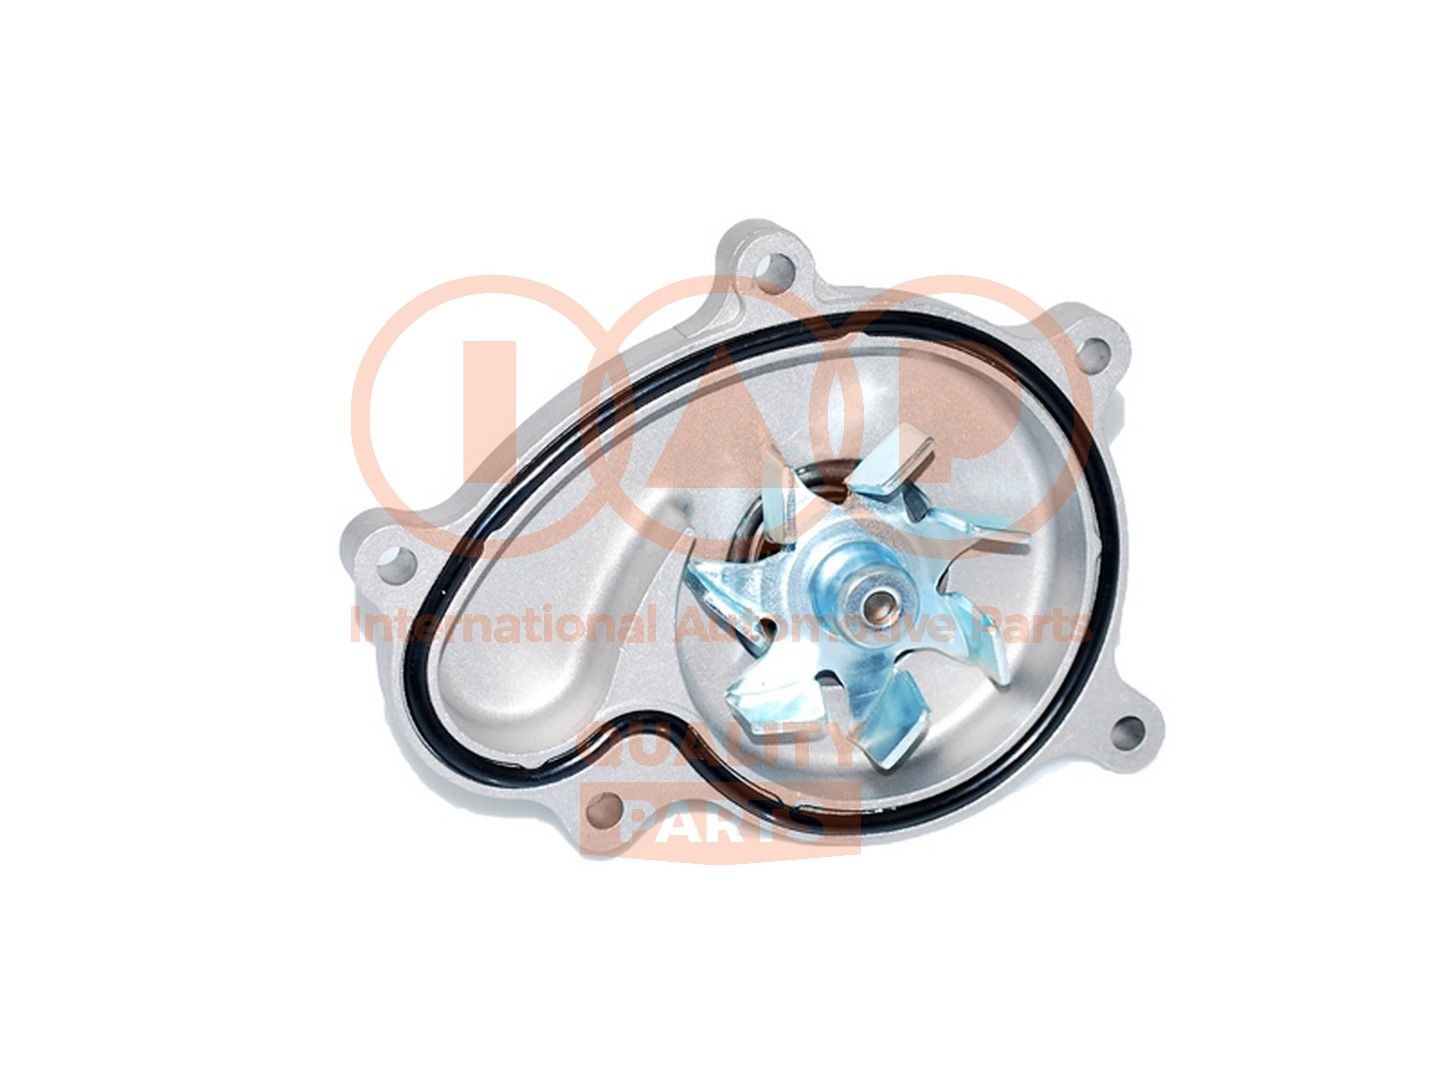 IAP QUALITY PARTS Water pump for engine 150-15080